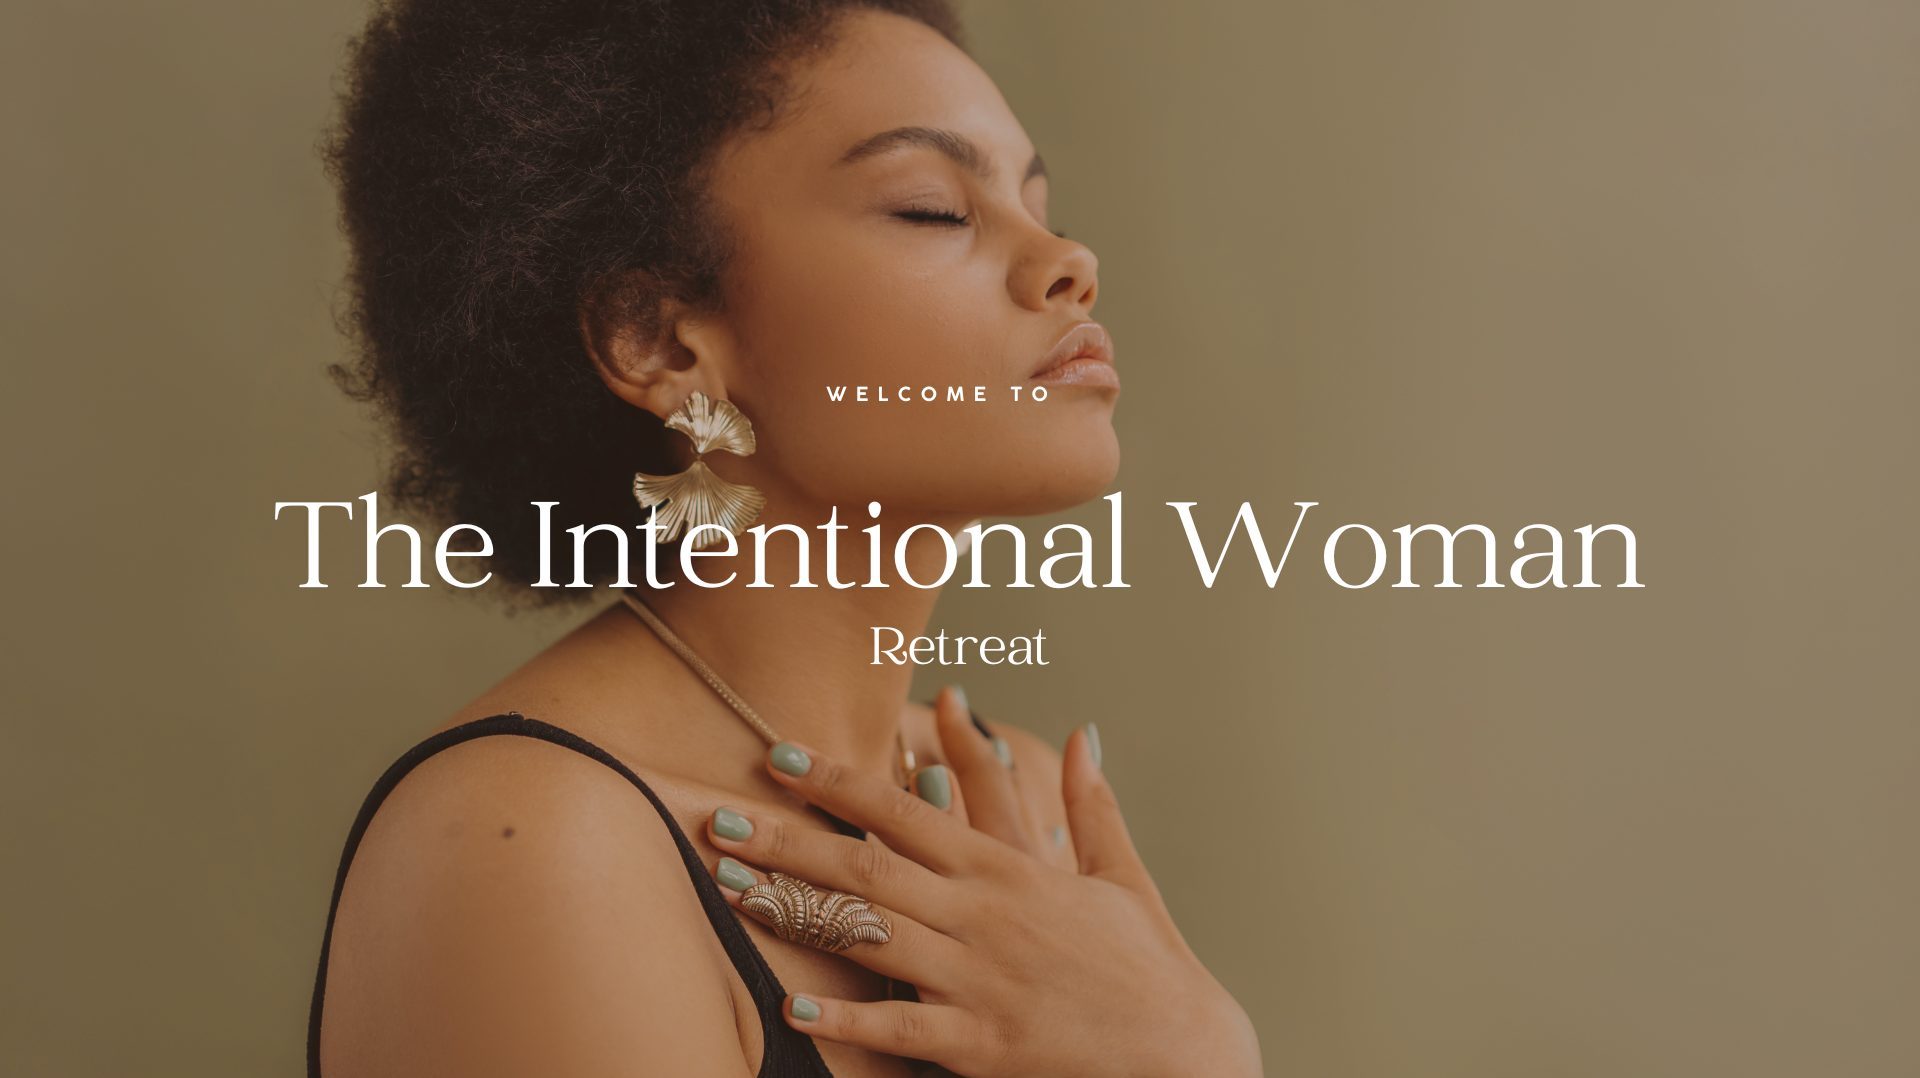 The Intentional Woman Retreat